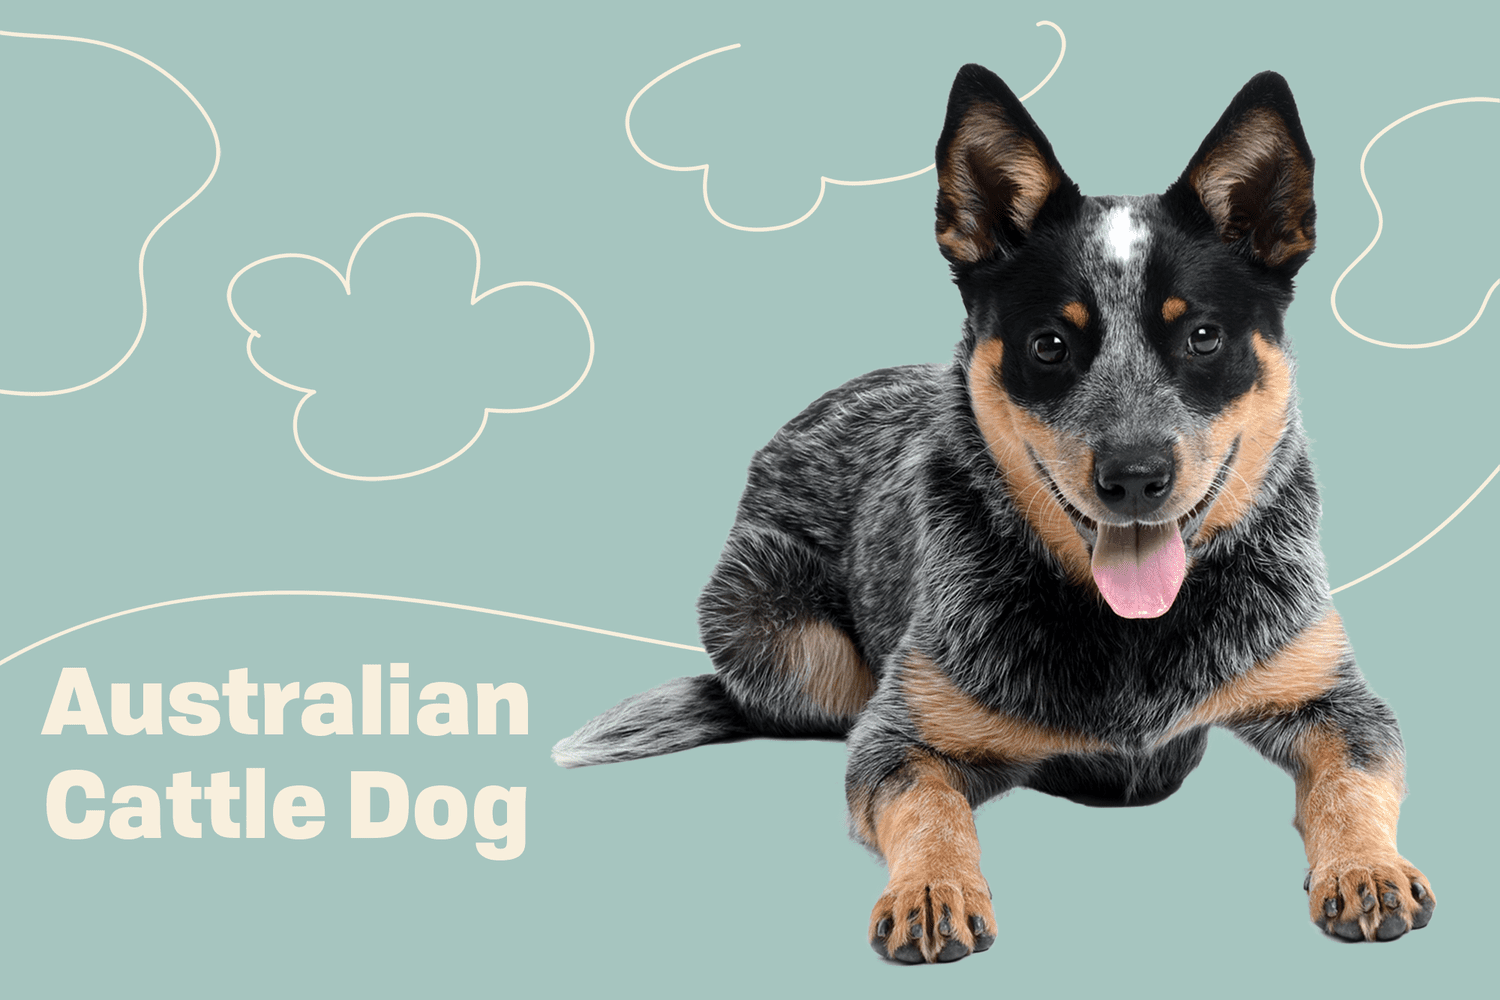 Blue Heeler Dog Breeds: Health Care & Amazing Facts You Need to Know